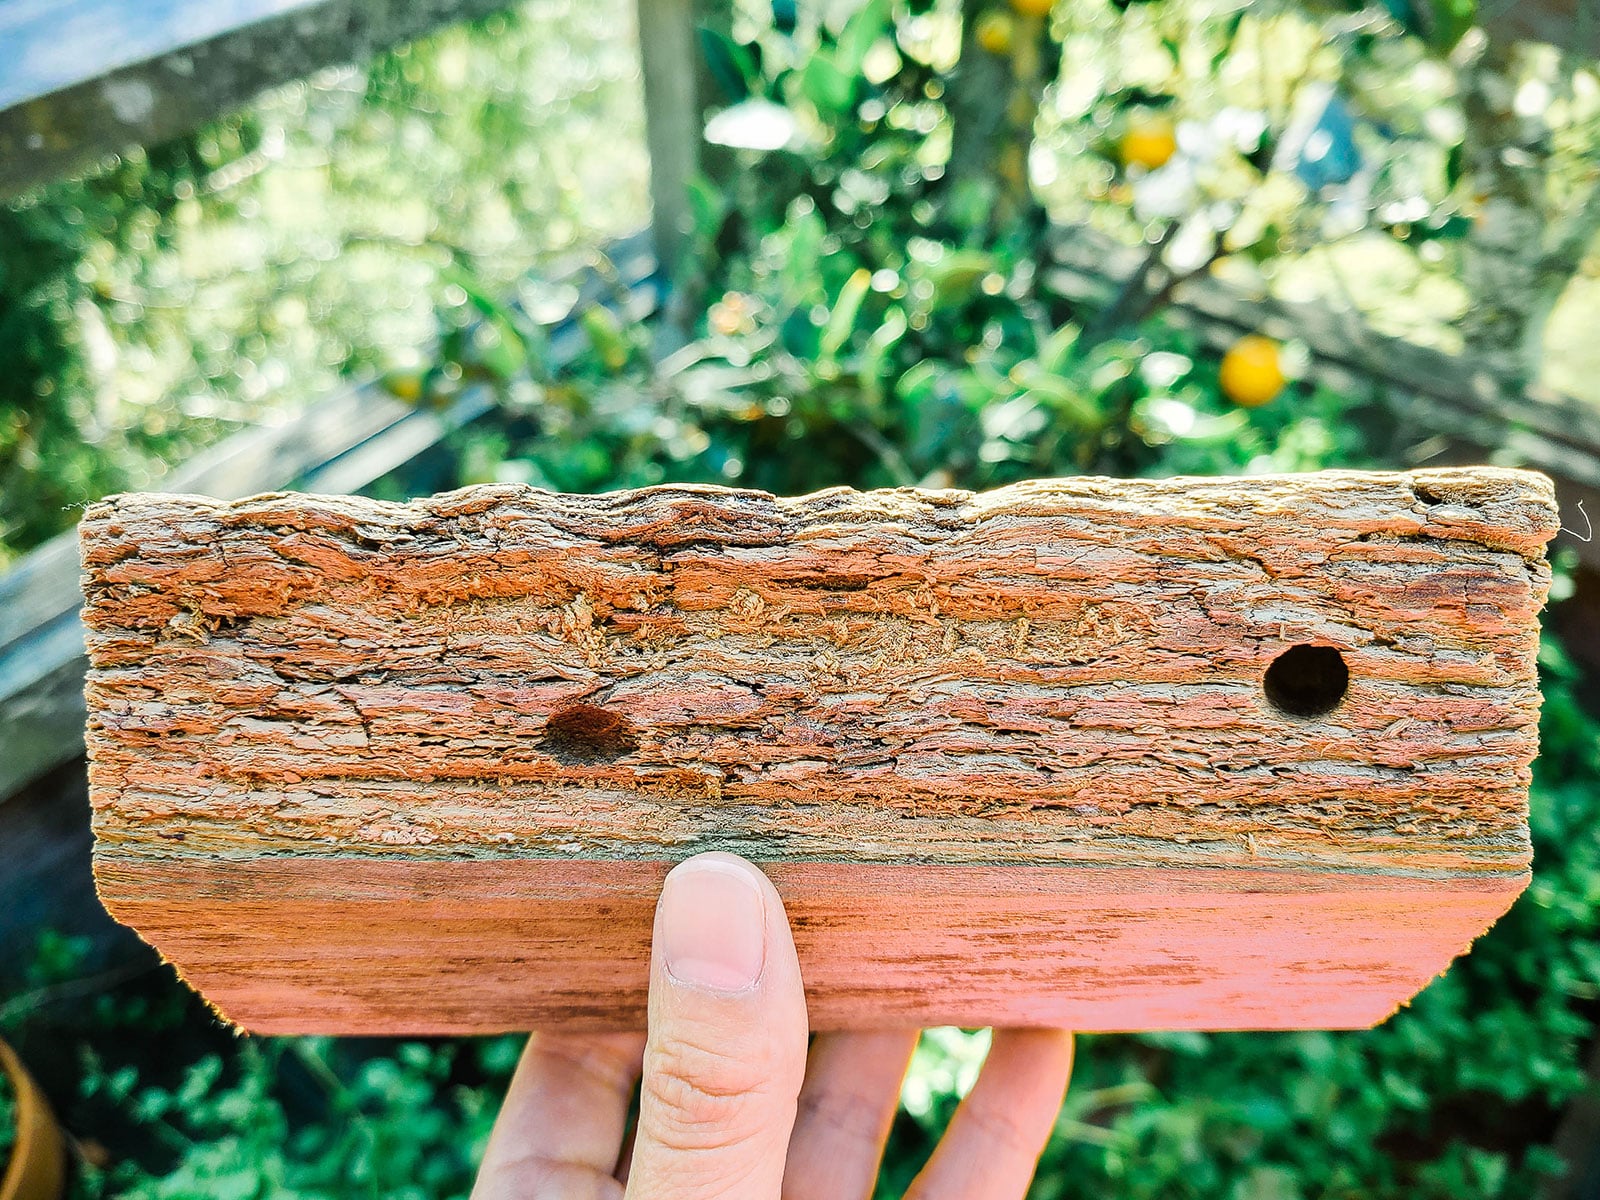 Hand holding a piece of wood with two round holes bored by carpenter bees